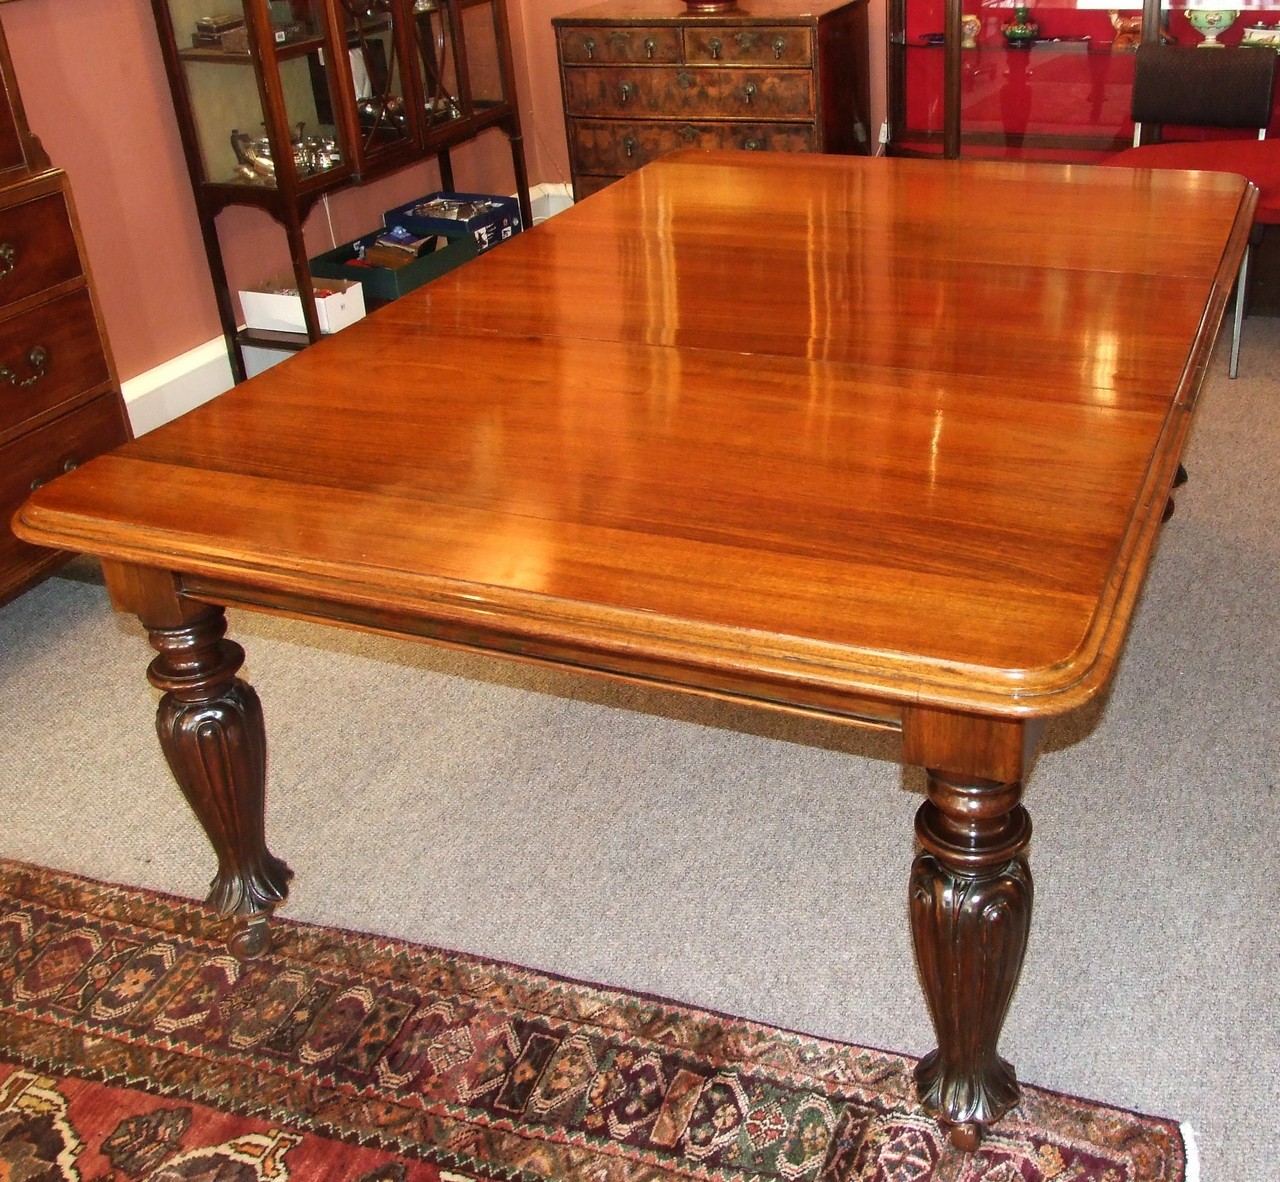 Victorian Mahogany Dining Table on Carved Turned Legs with Single Leaf (max. 80” x 54”). £1000/1500